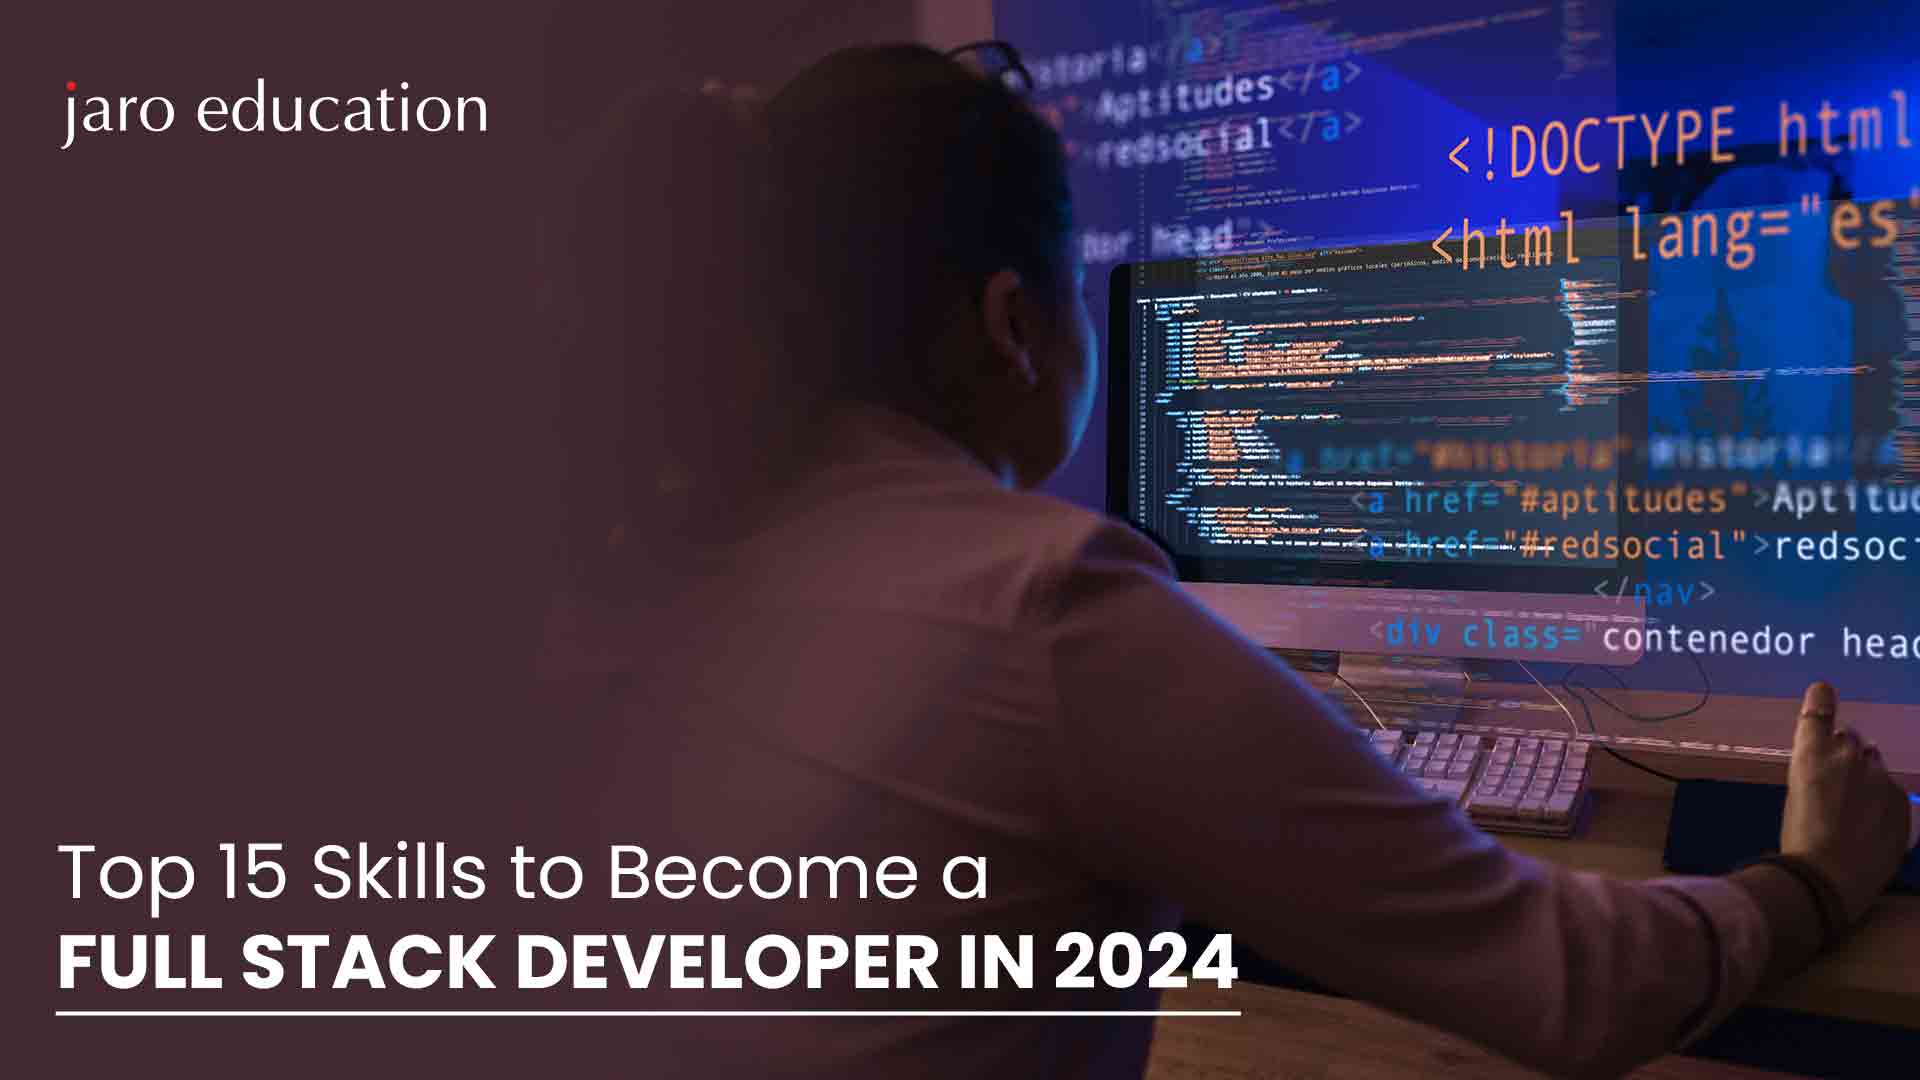 Top 15 Skills to Become a Full Stack Developer in 2024